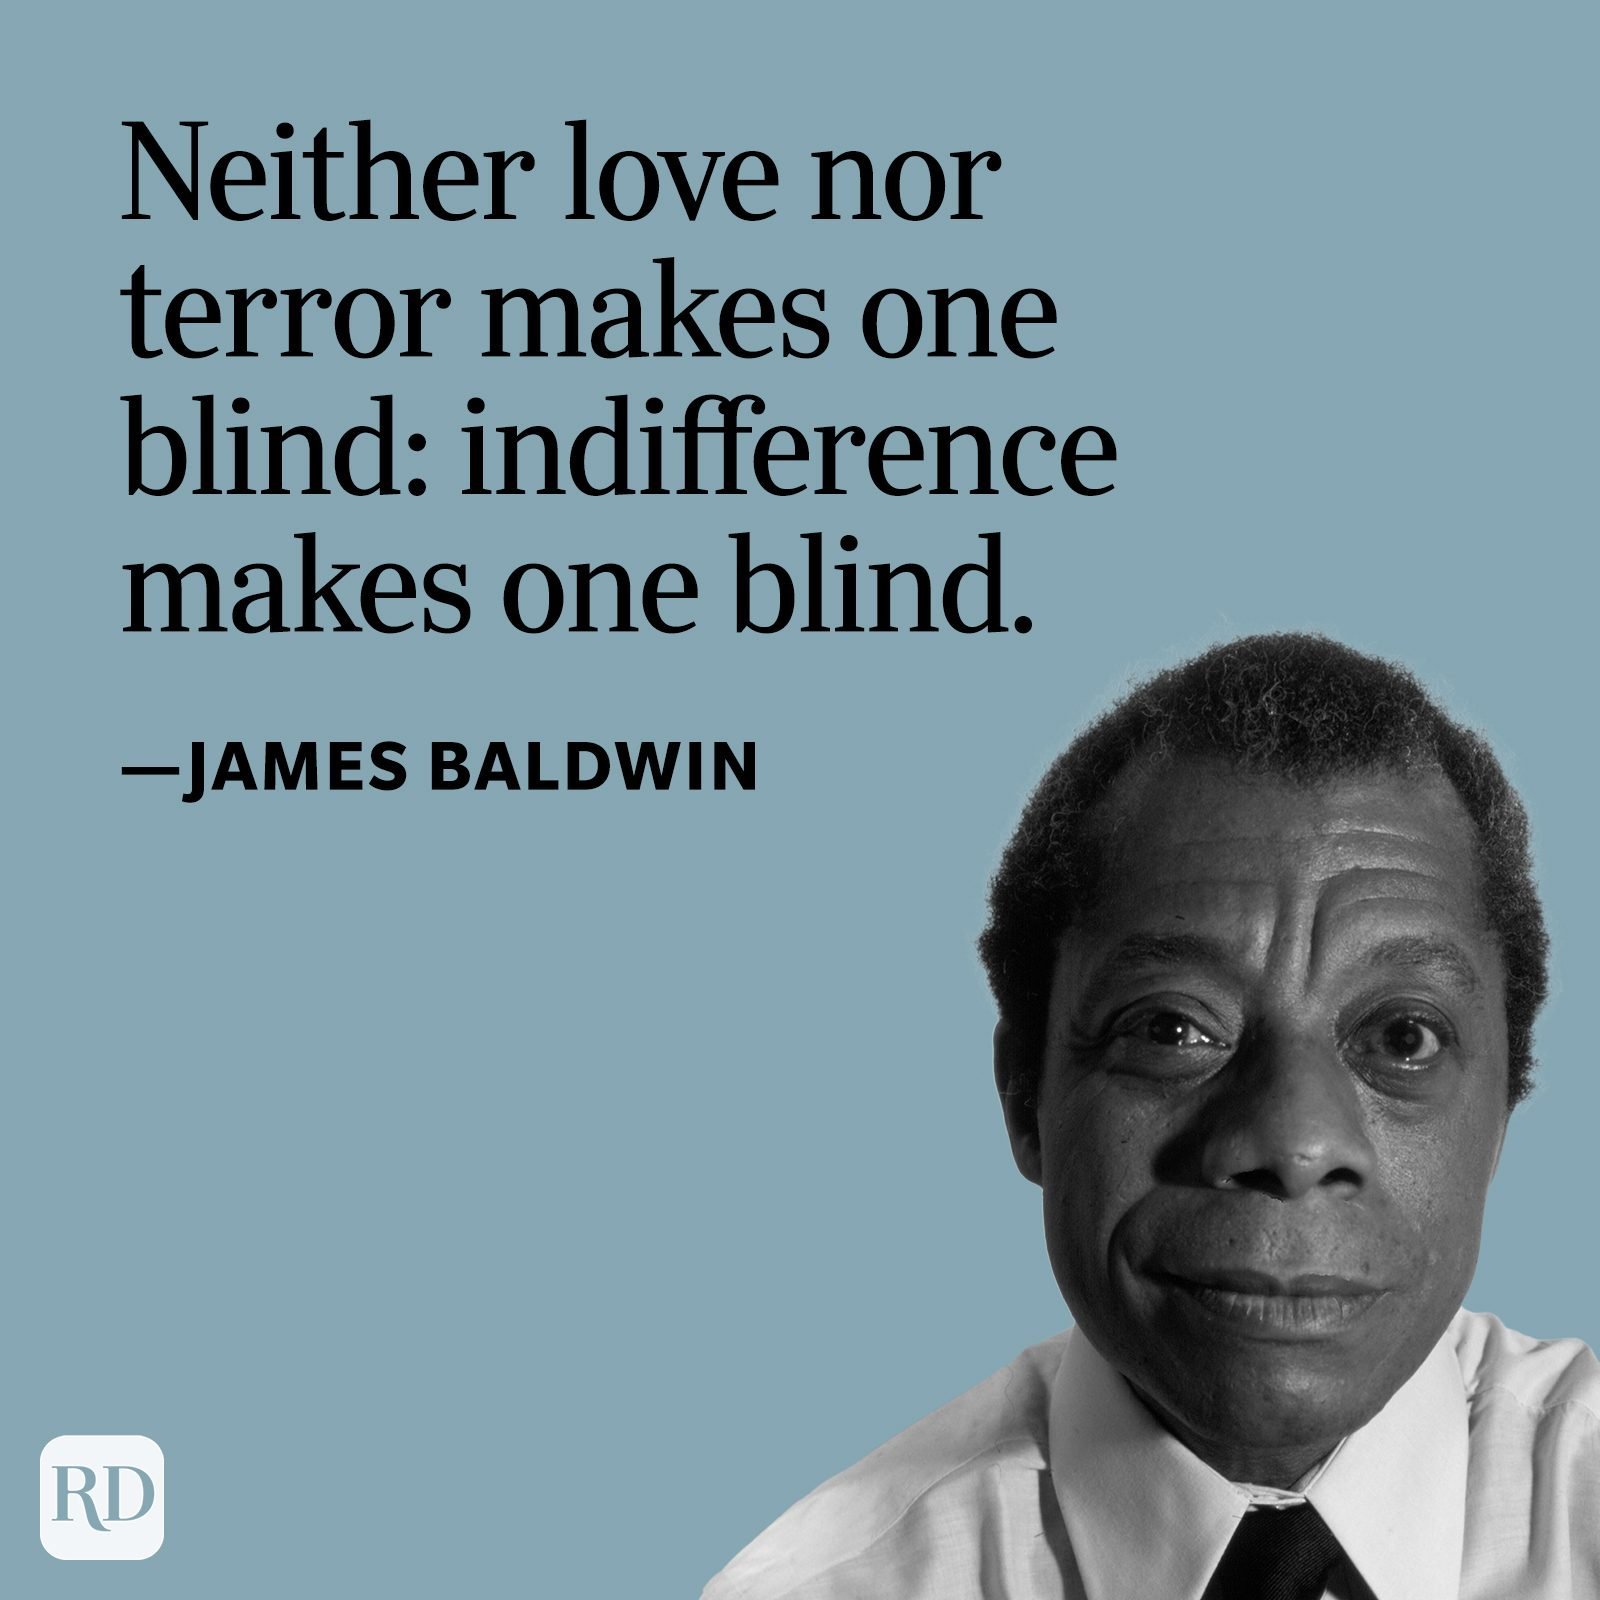 40 Powerful James Baldwin Quotes on Love, Freedom, and Equality